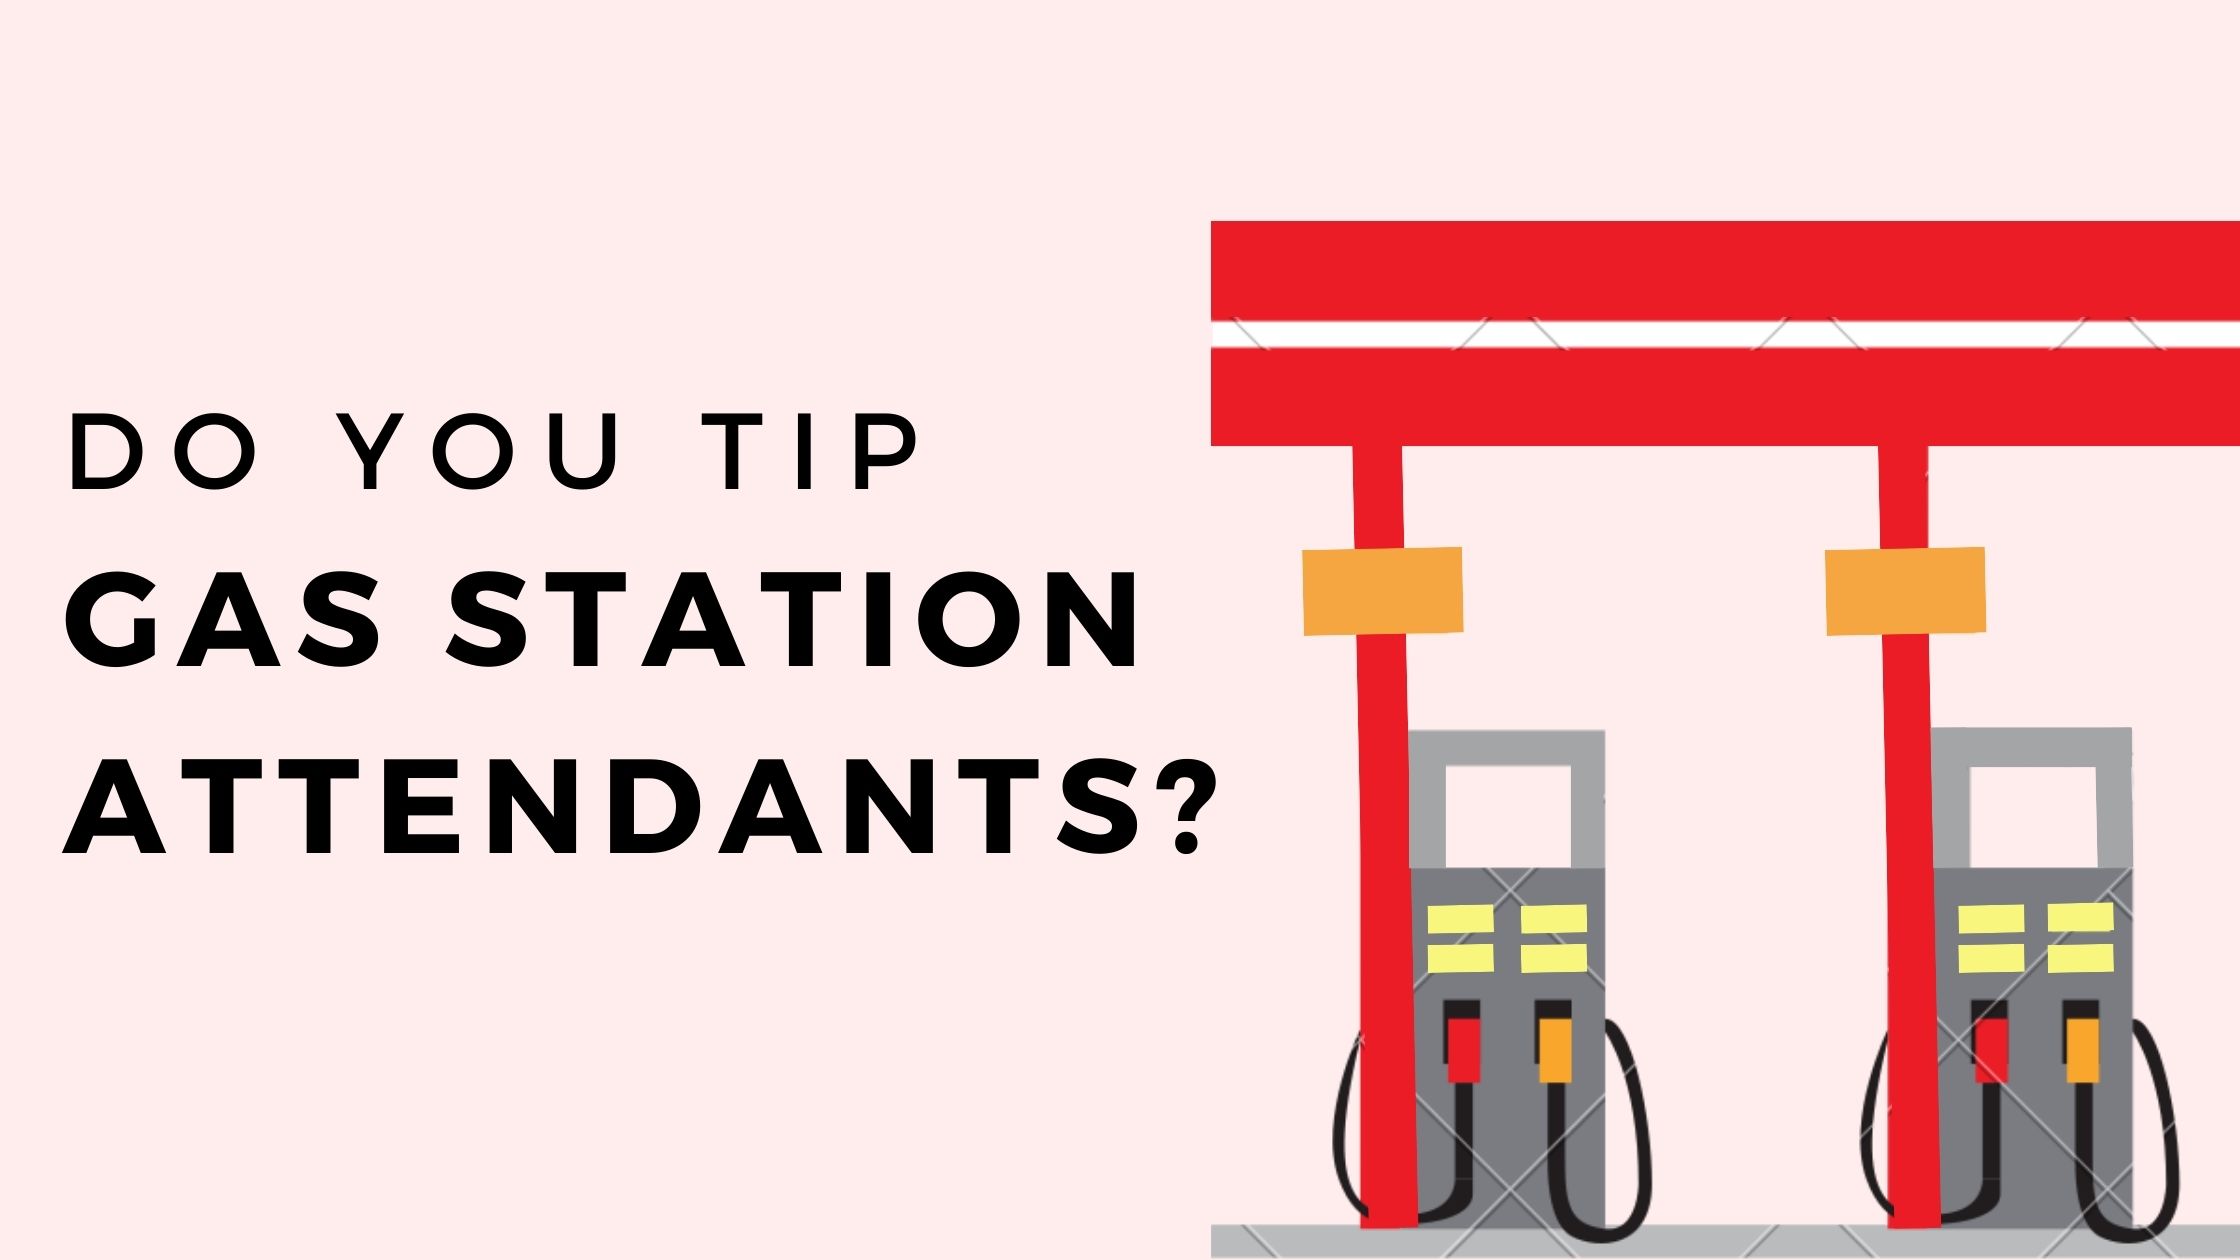 Do You Tip Gas Station Attendants?